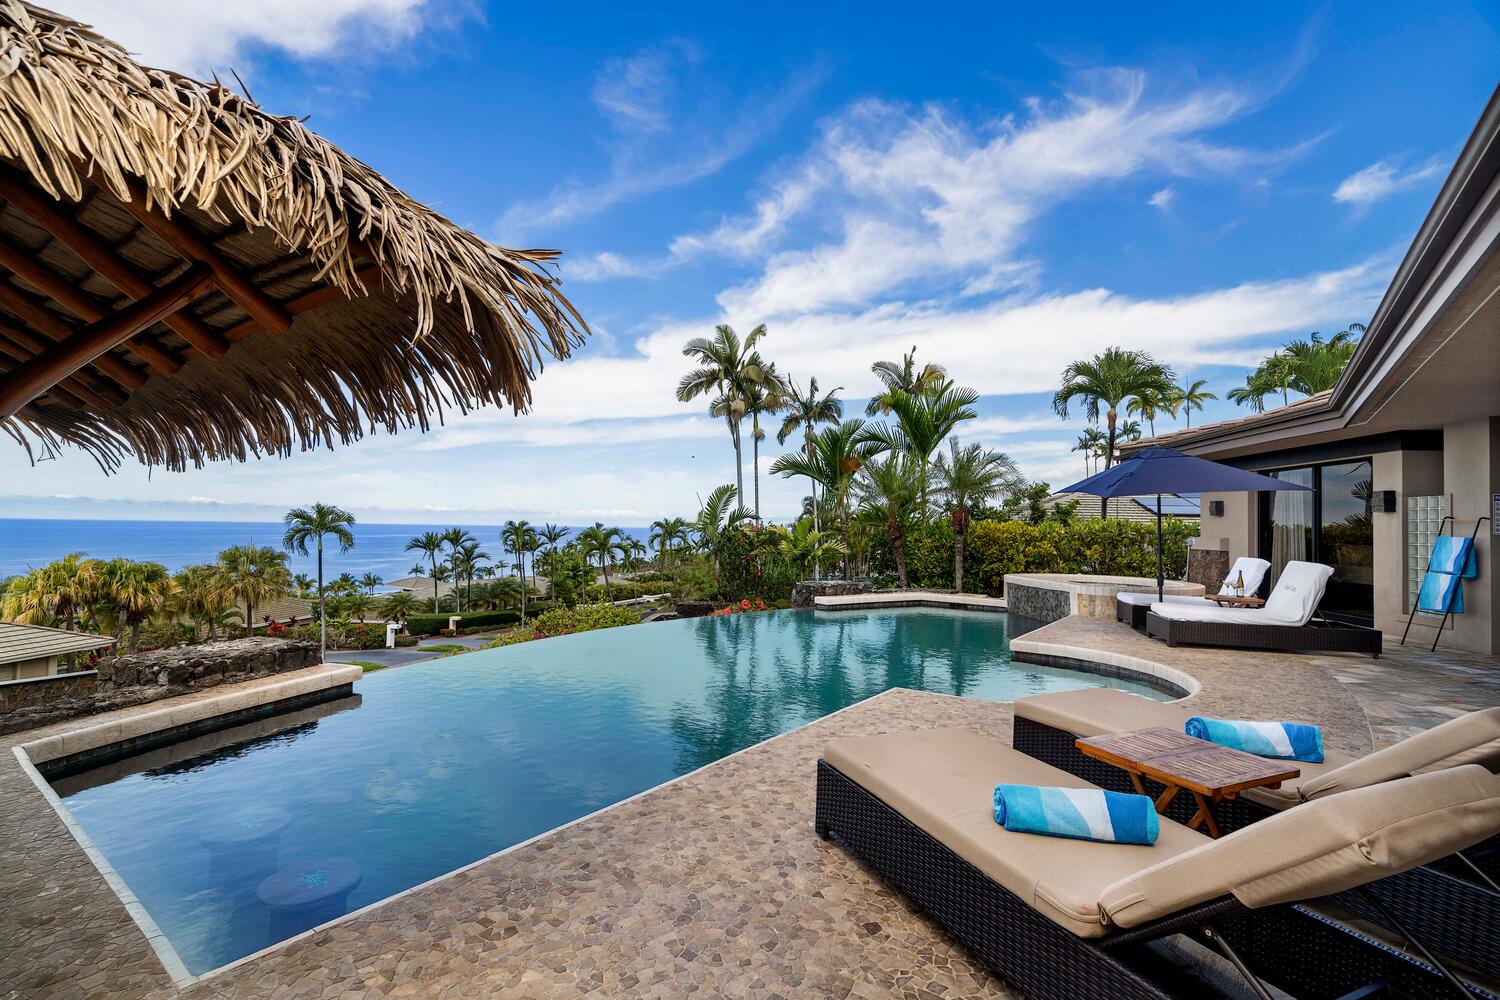 Kailua Kona Vacation Rentals, Island Oasis - Lounge in our poolside chaise lounges, inviting you to relax and savor the island sky.